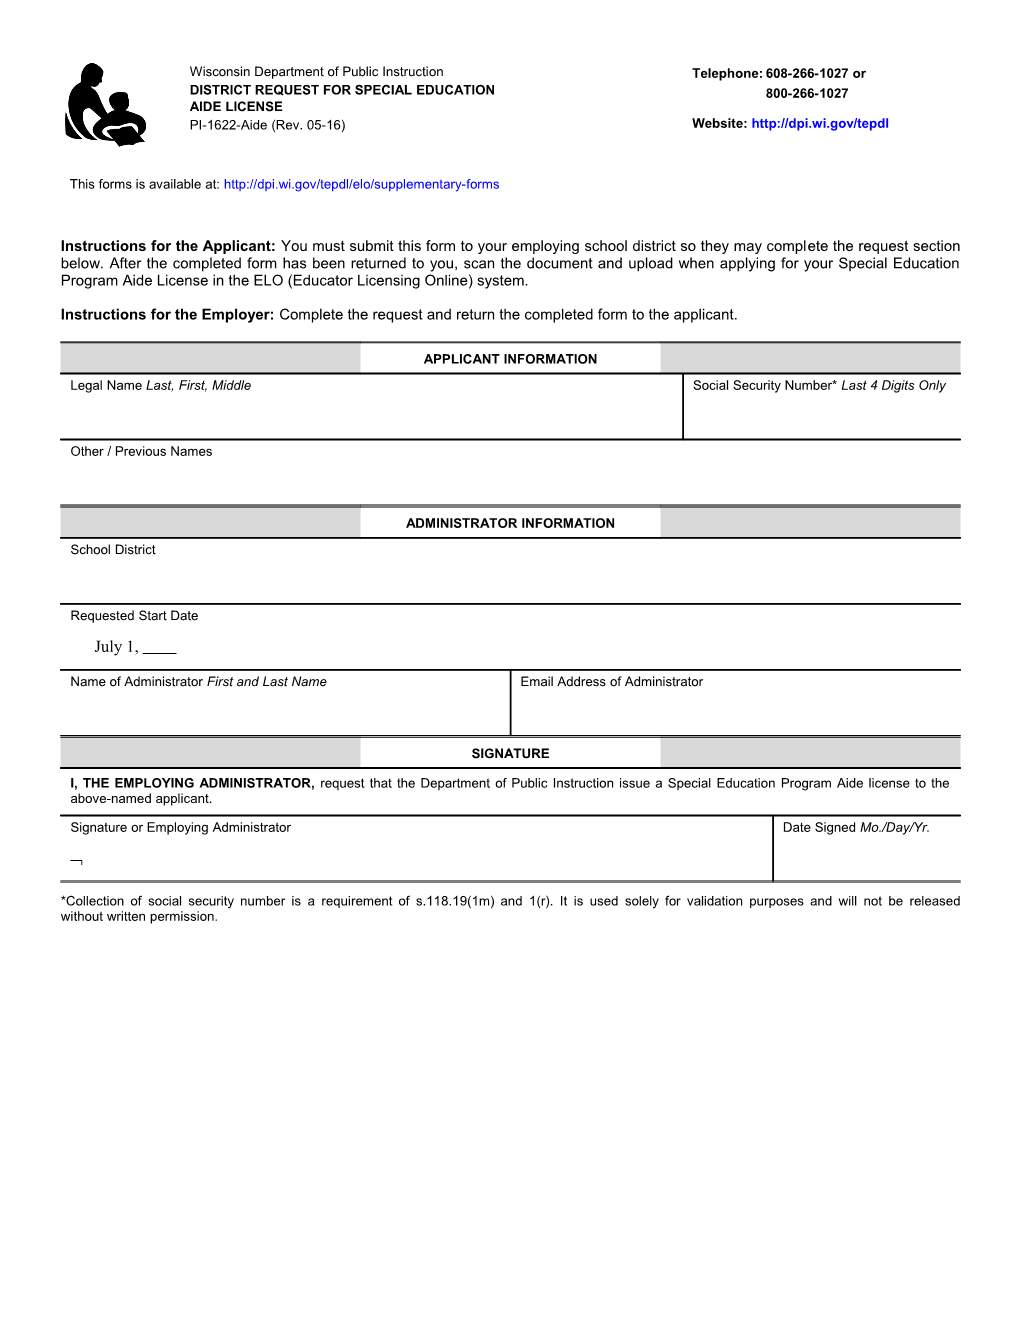 PI-1622-Aide District Request for Special Education Aide License